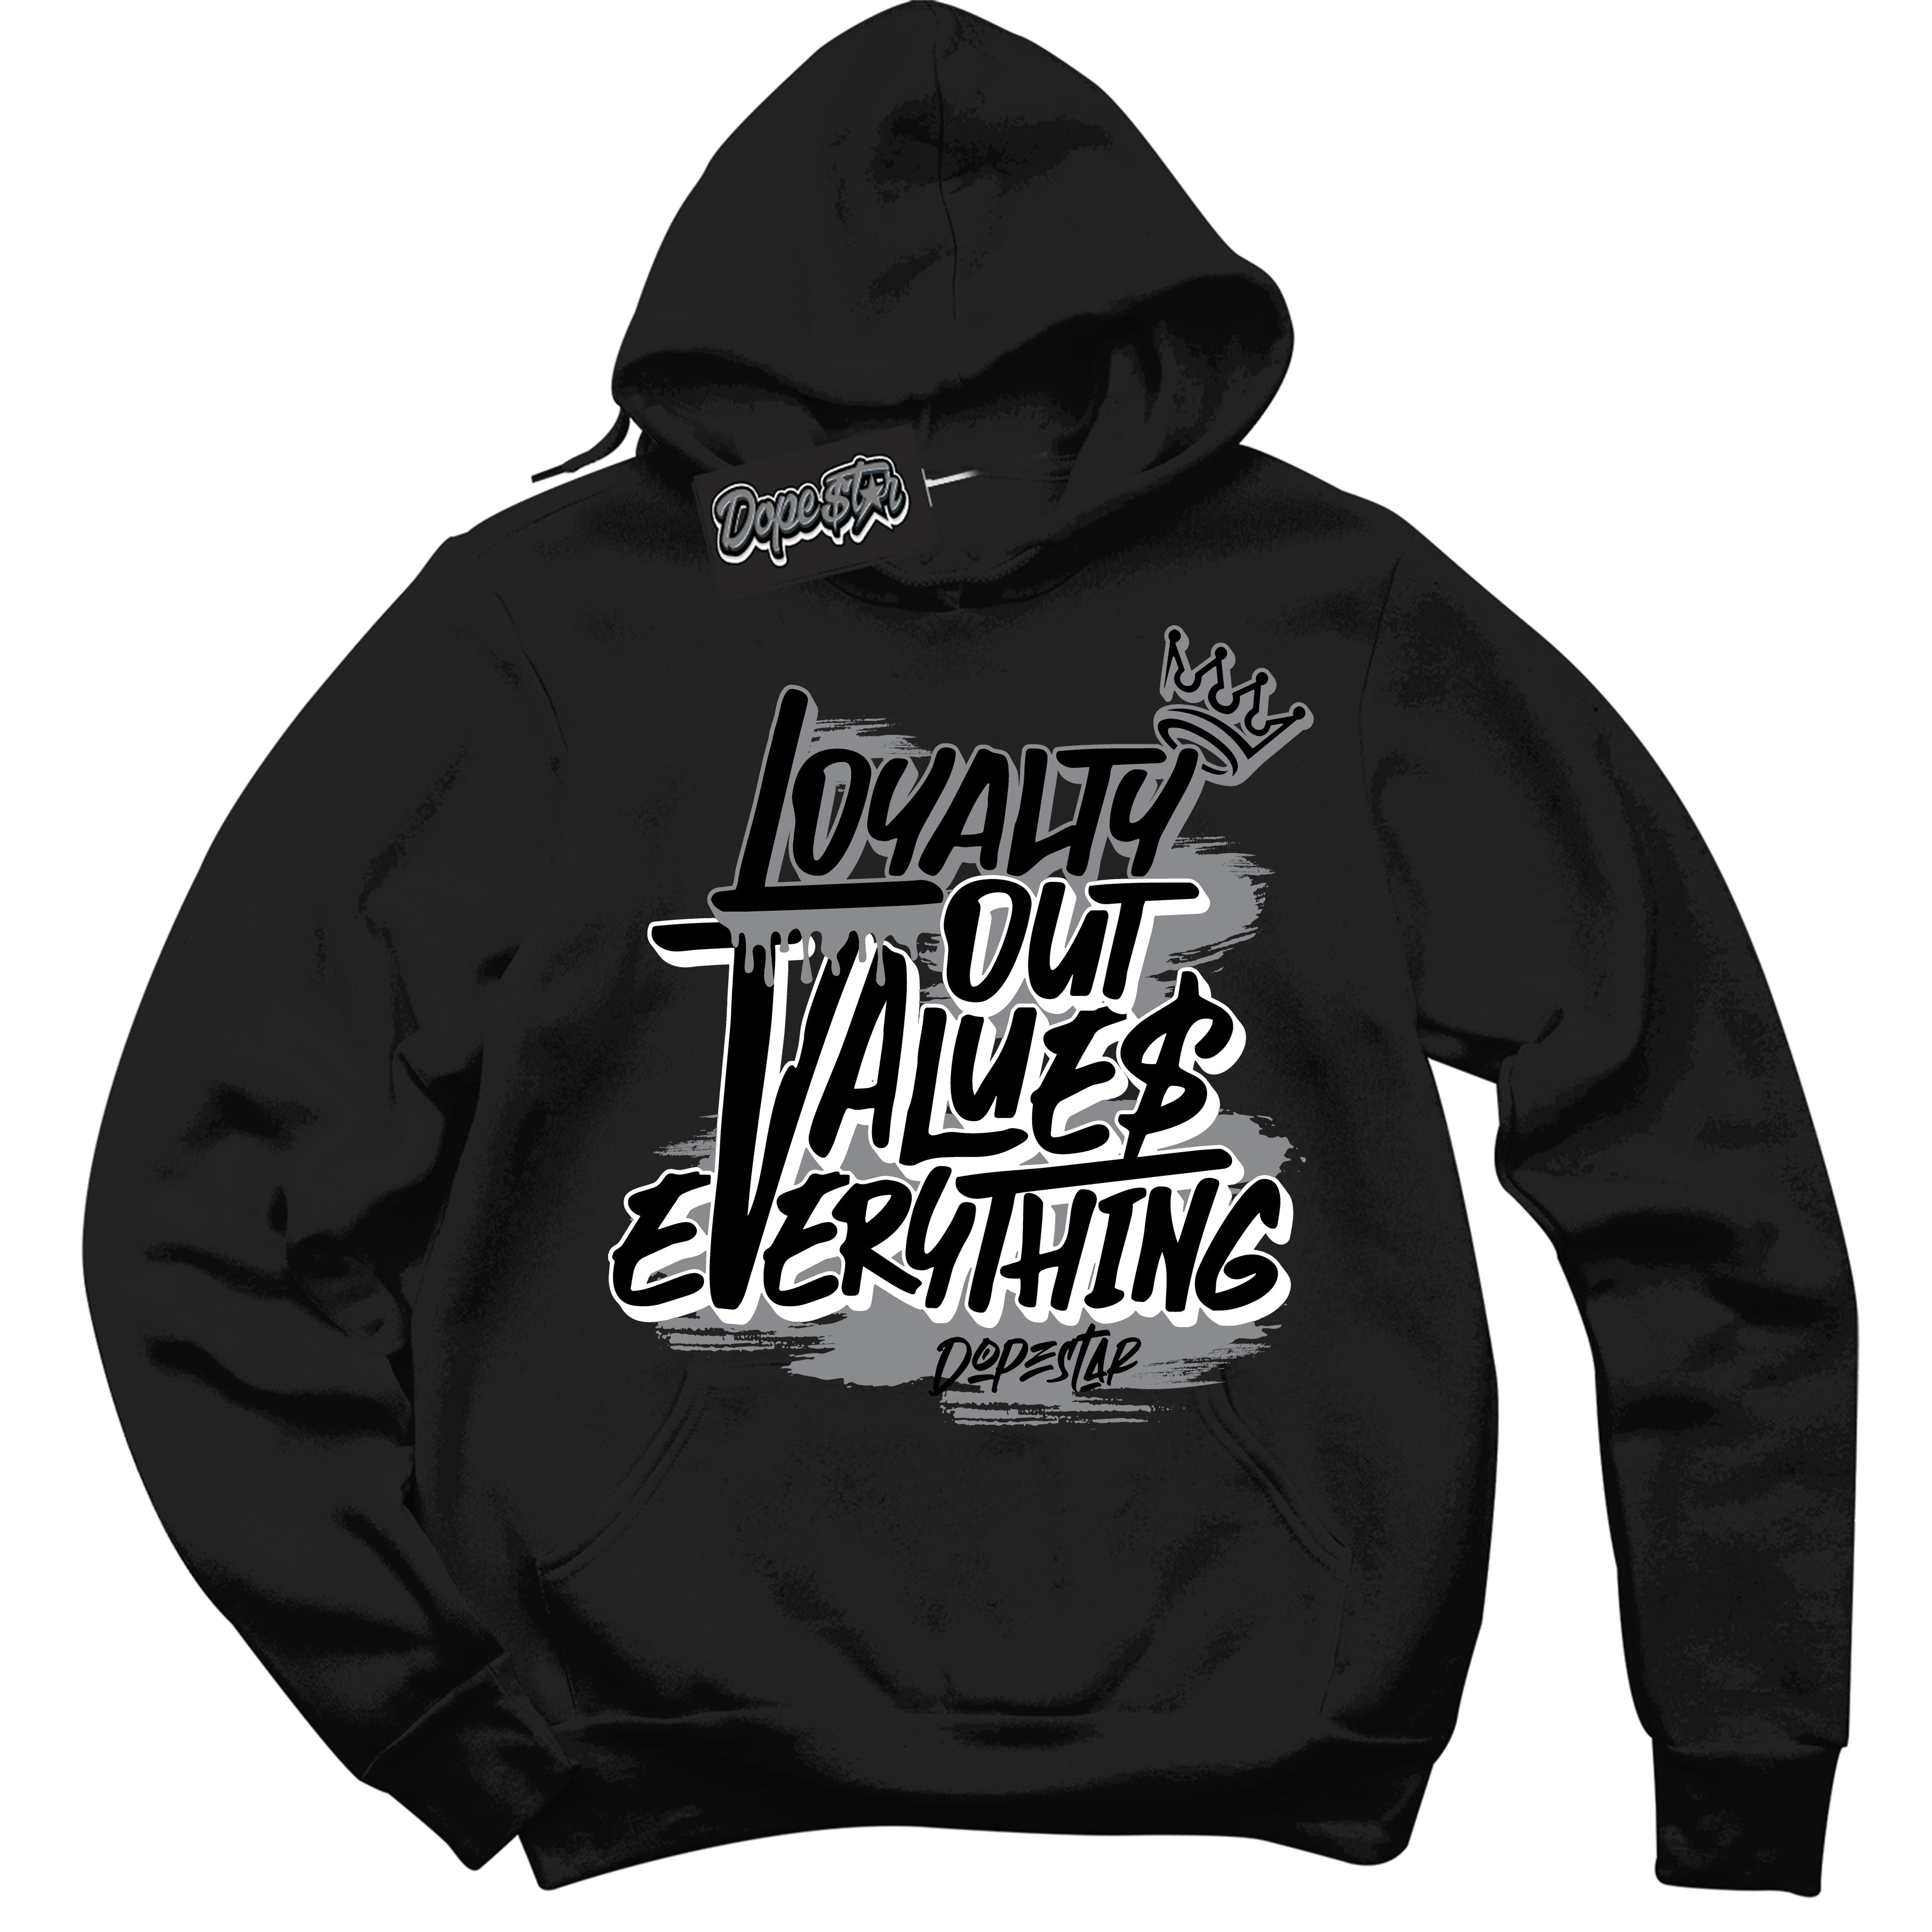 Cool Black Hoodie with “ Loyalty Out Values Everything ”  design that Perfectly Matches  SE Black Canvas 4s Sneakers.